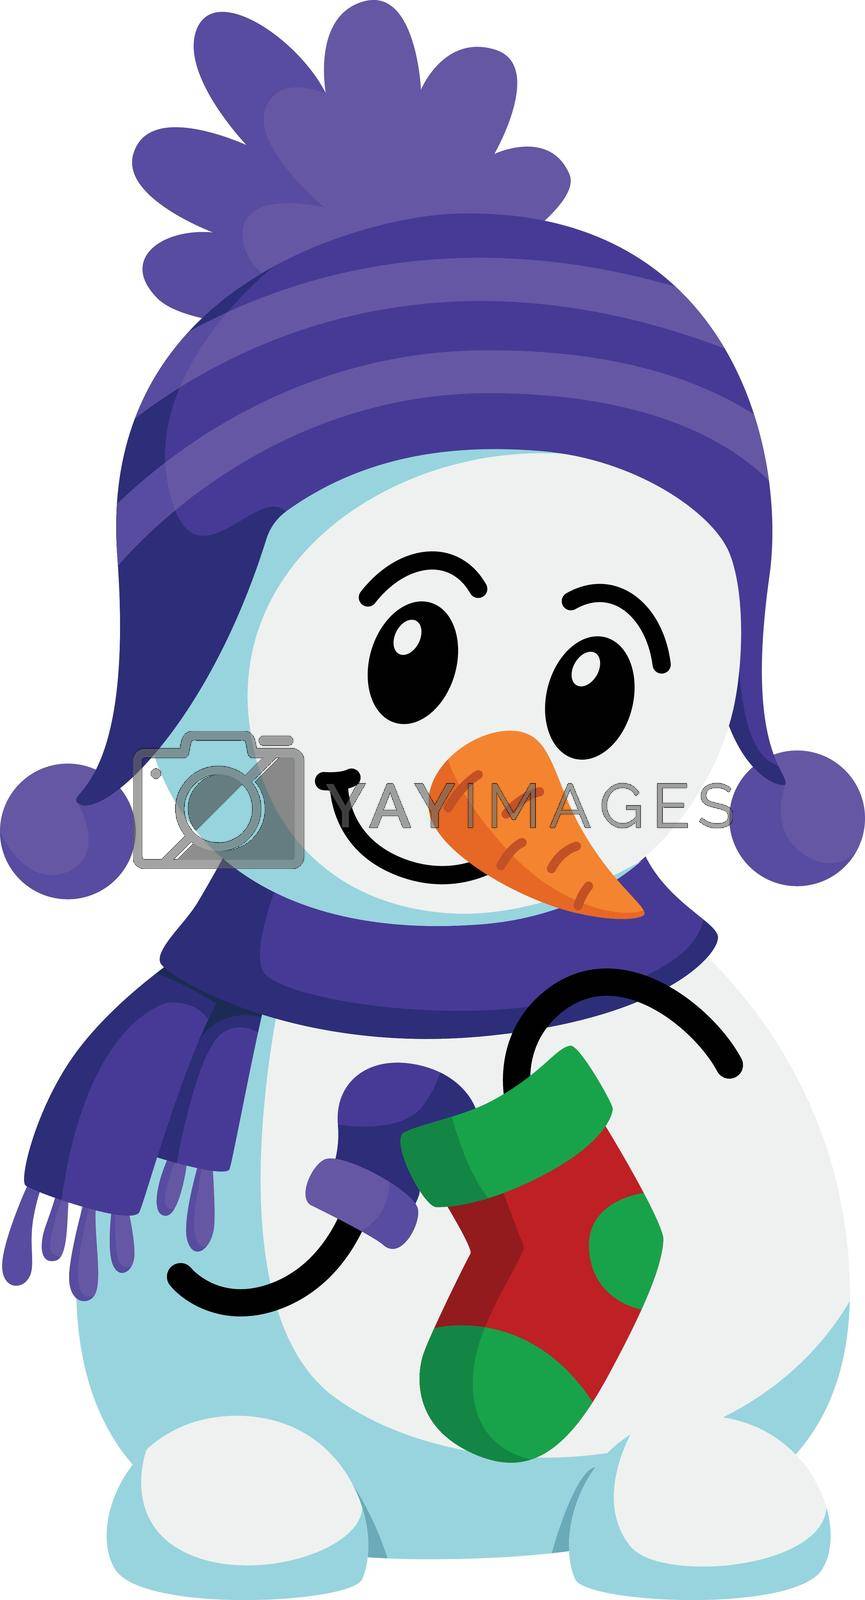 Royalty free image of Cute snowman with sock. Smiling winter holidays mascot by LadadikArt